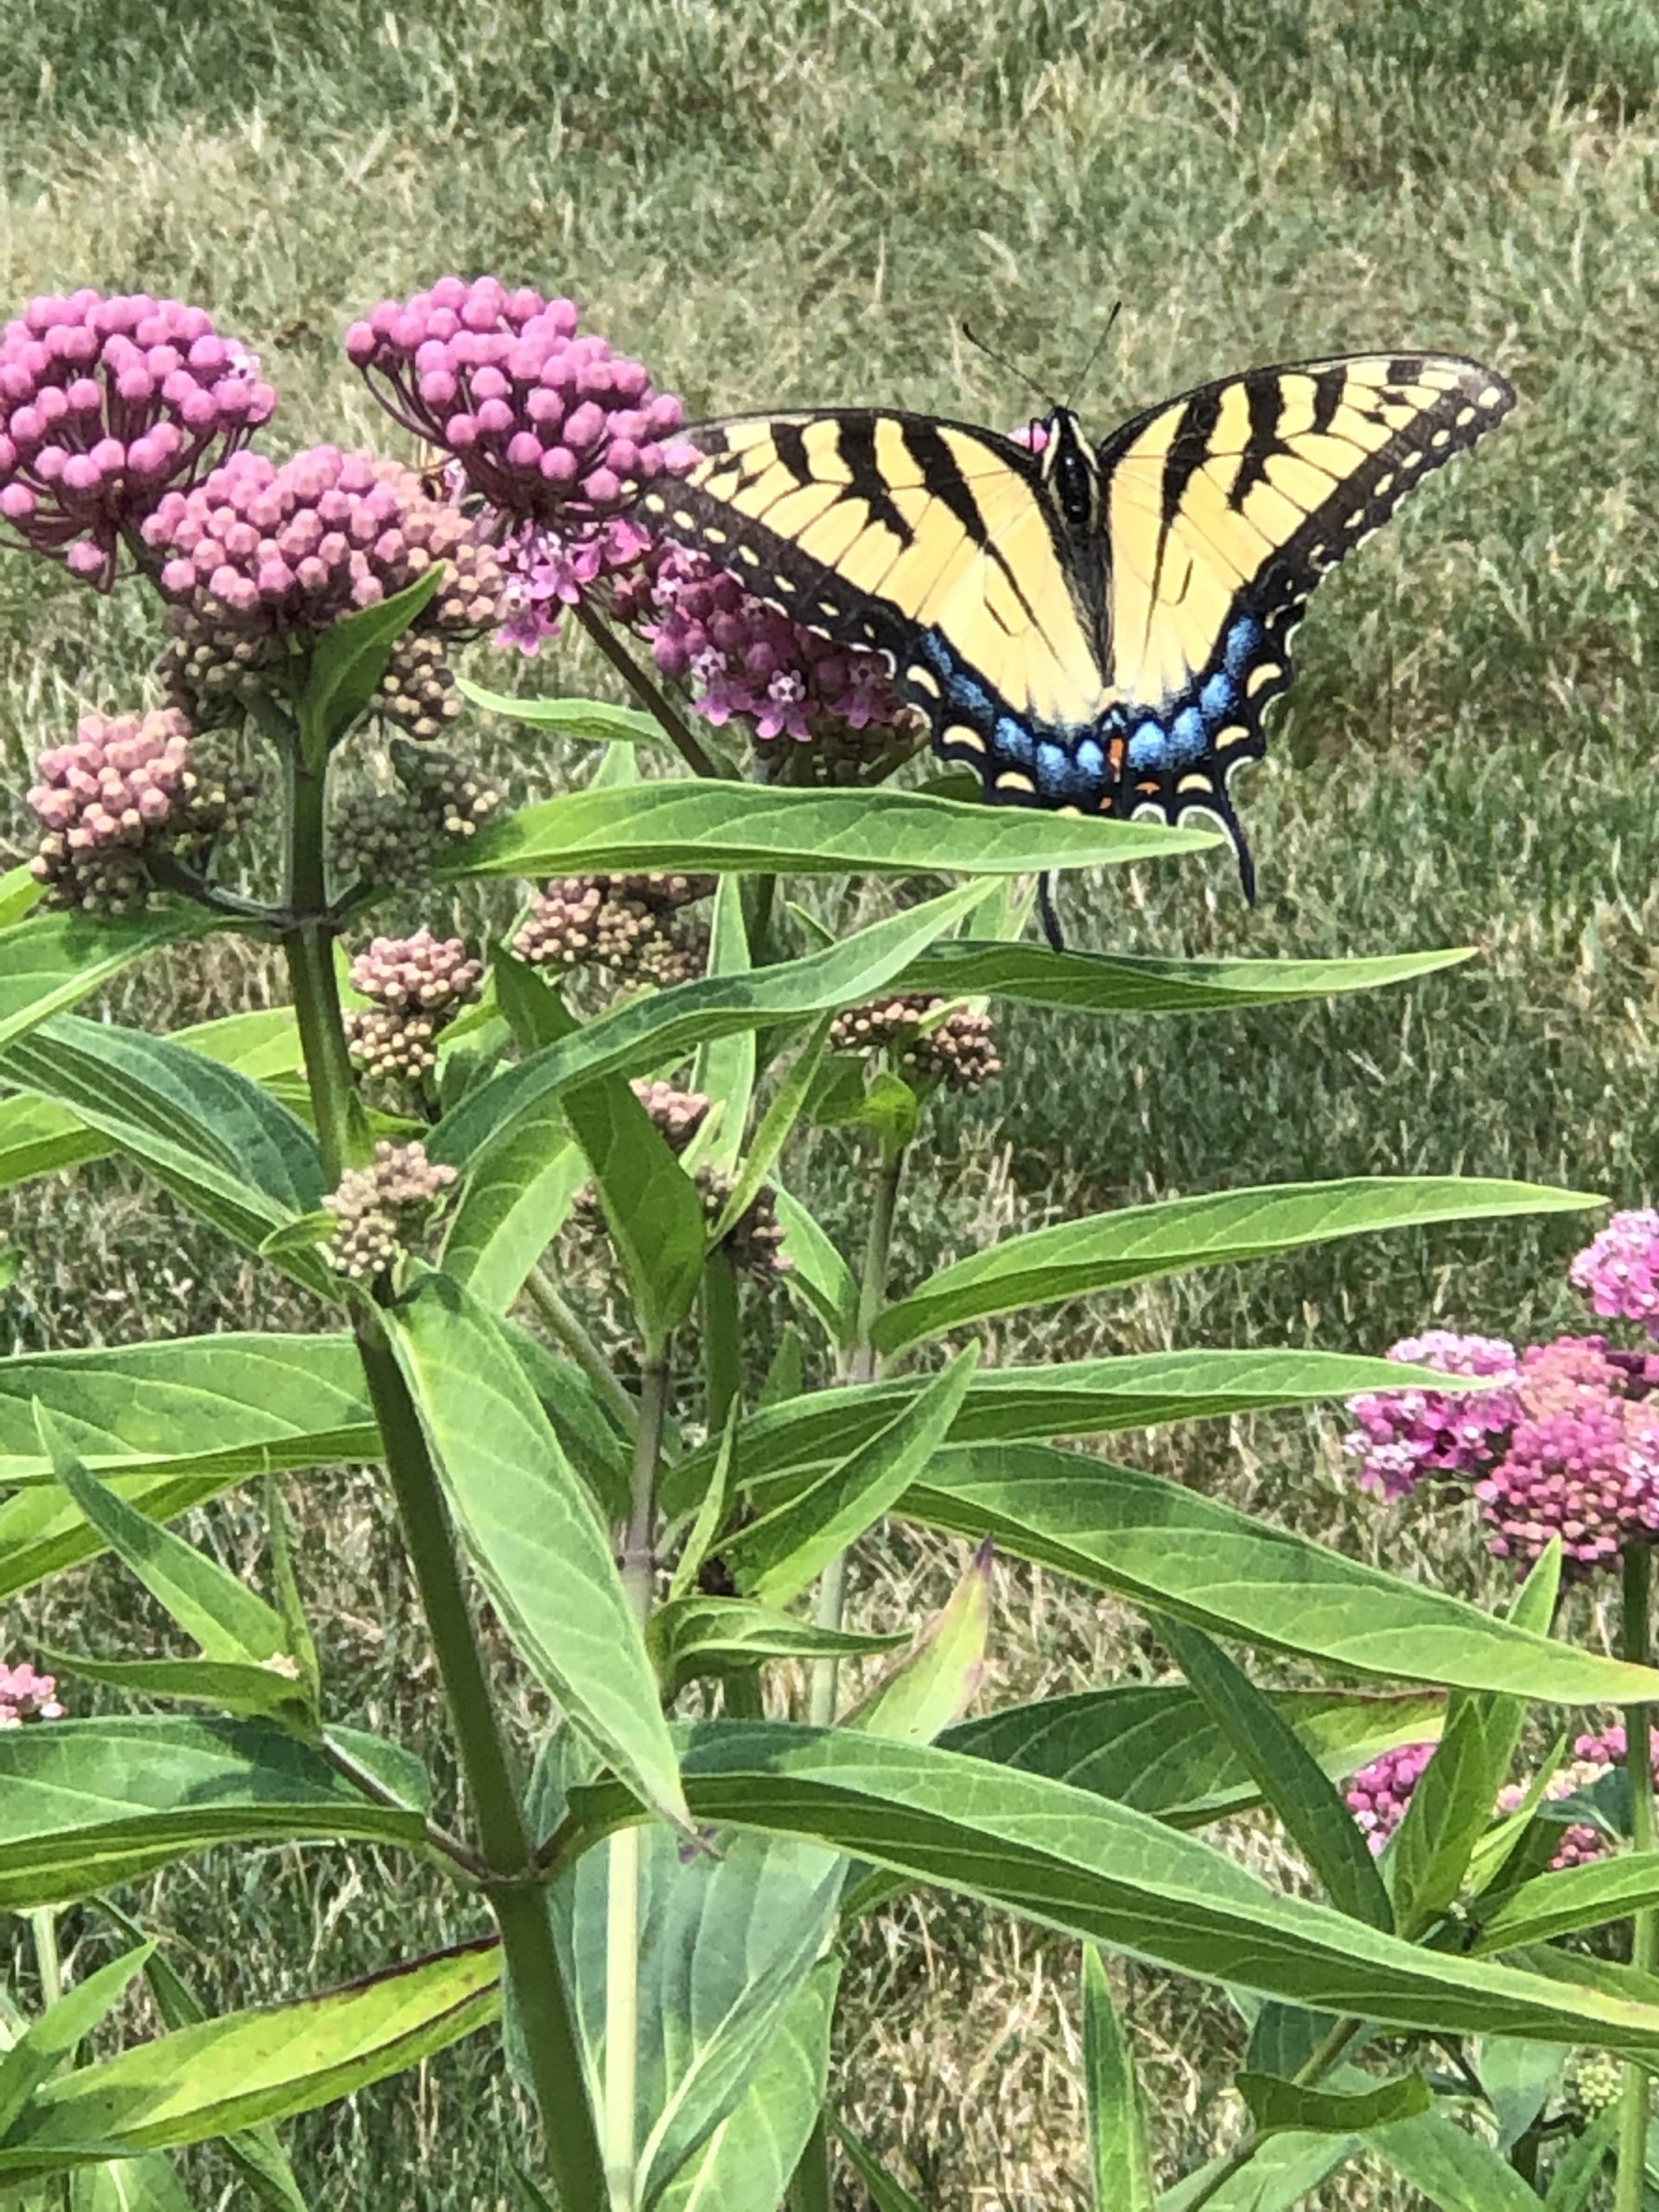 Canadian Tiger Swallowtail Butterfly on Swamp Milkweed